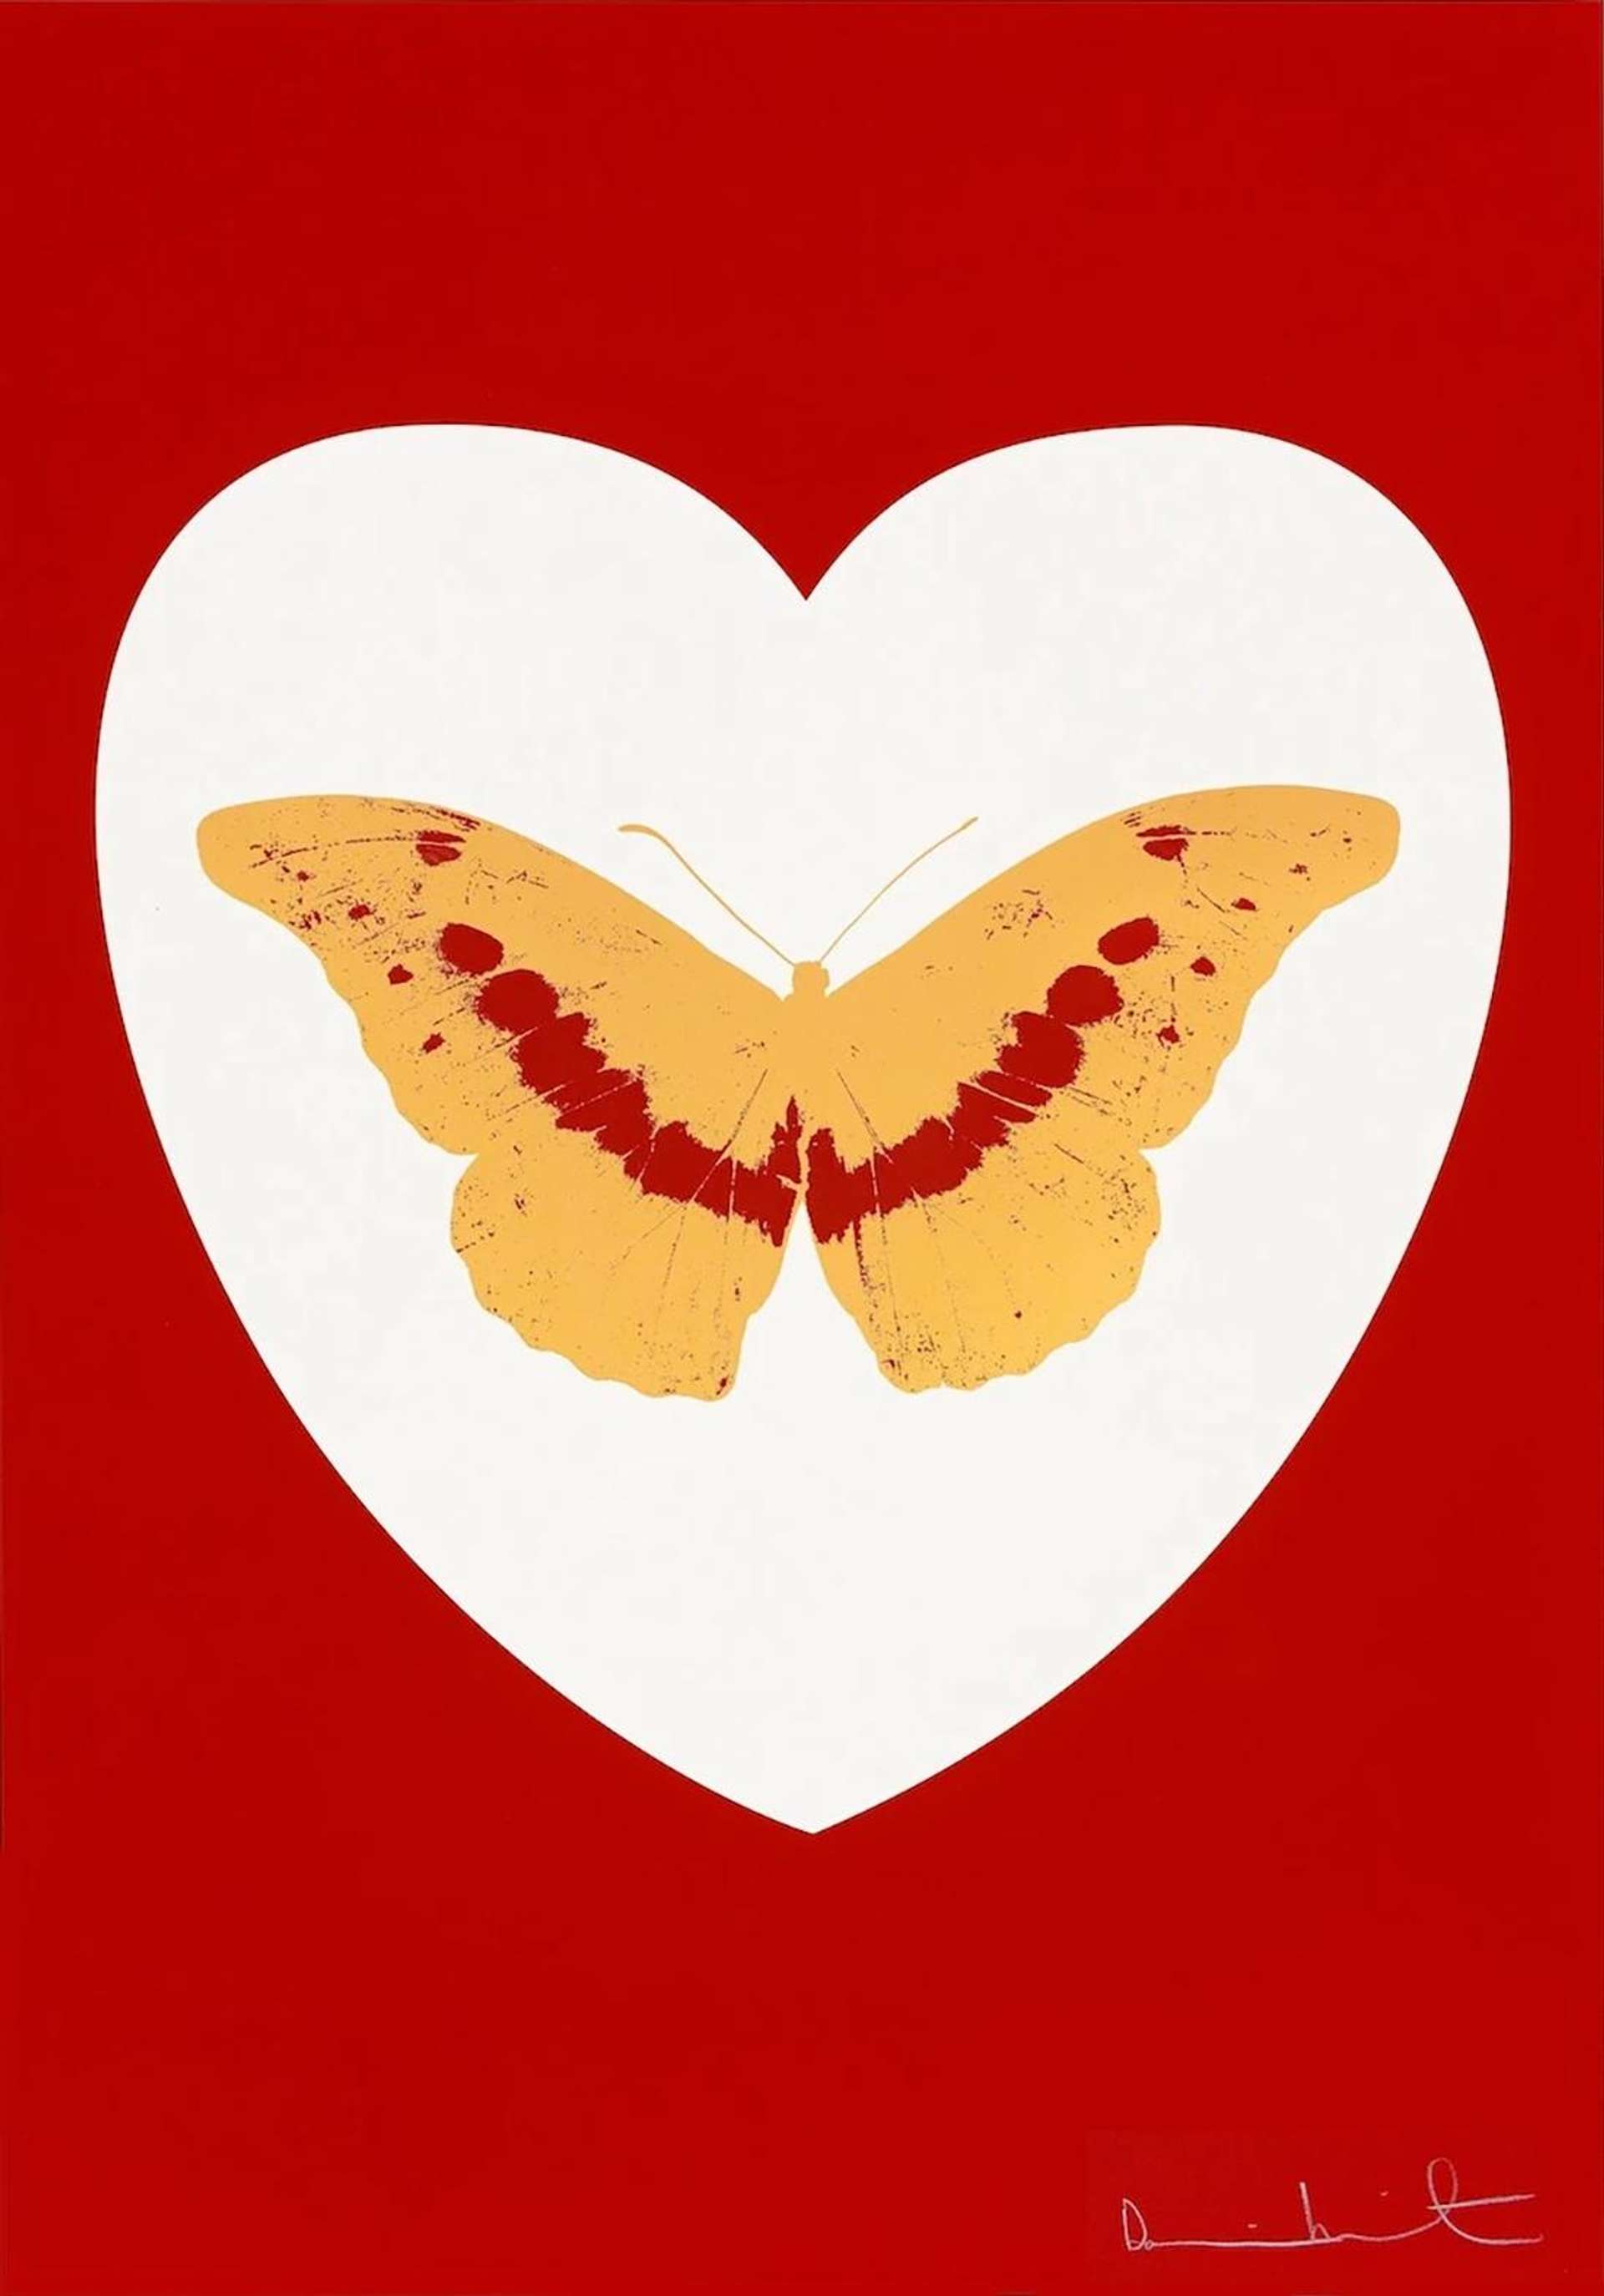 I Love You (white, red, cool gold, poppy red) by Damien Hirst